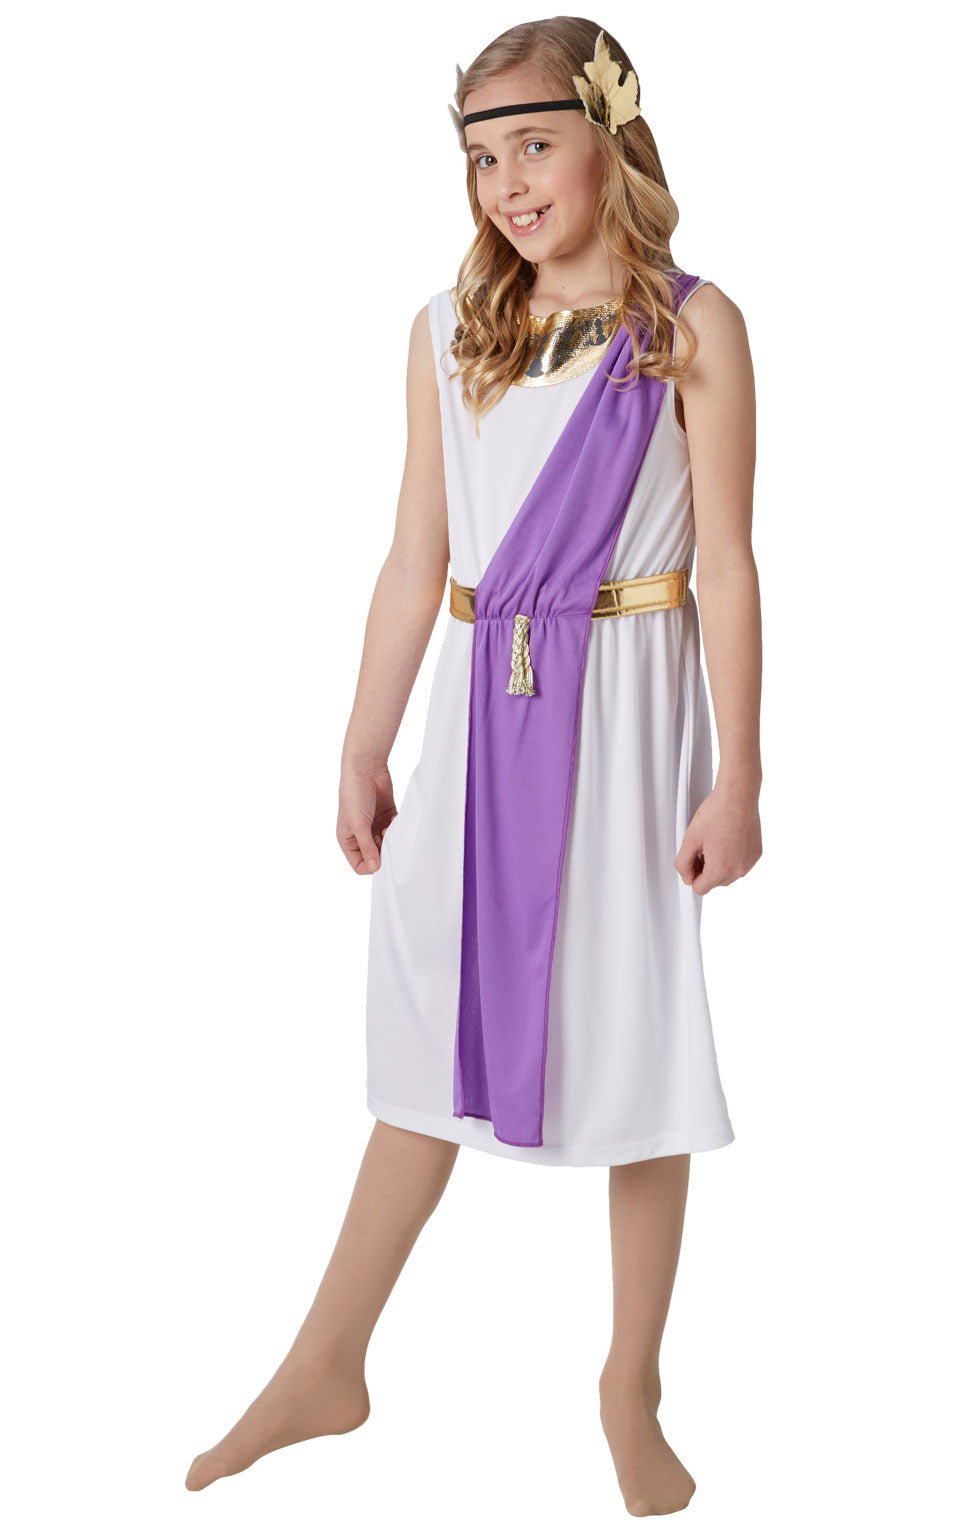 Roman Girl Fancy Dress Costume includes tunic with sash and gold wreath